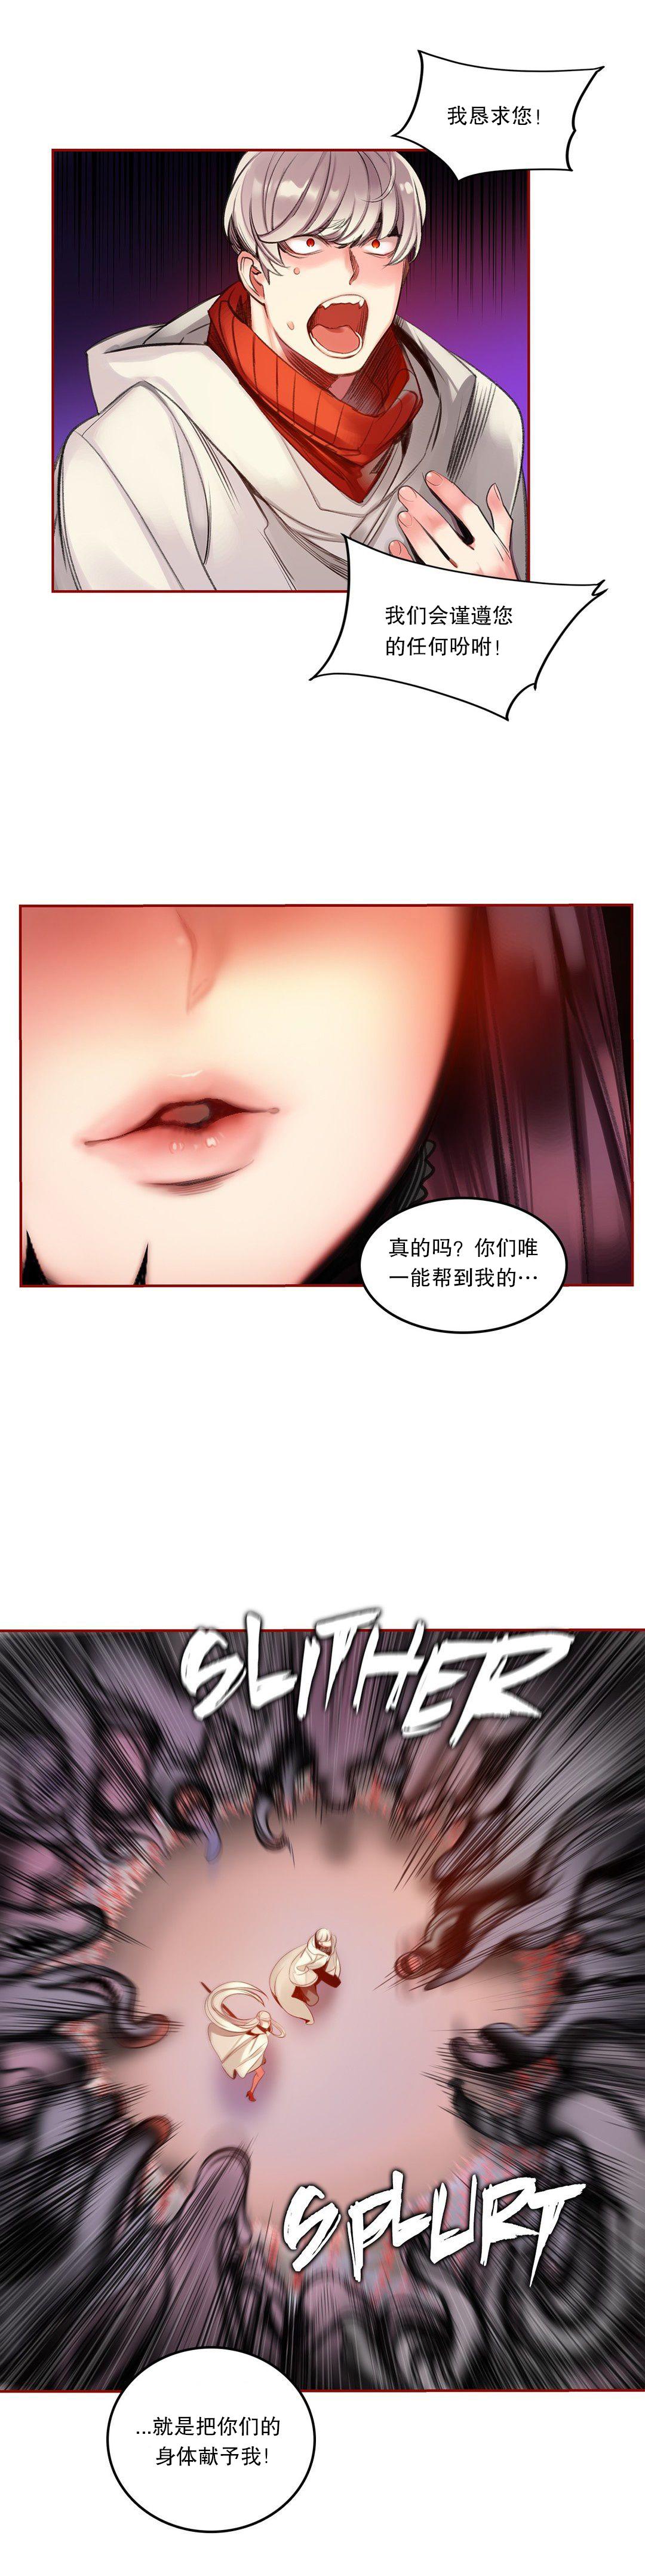 [Juder] Lilith`s Cord (第二季) Ch.61-64 [Chinese] [aaatwist个人汉化] [Ongoing] 87